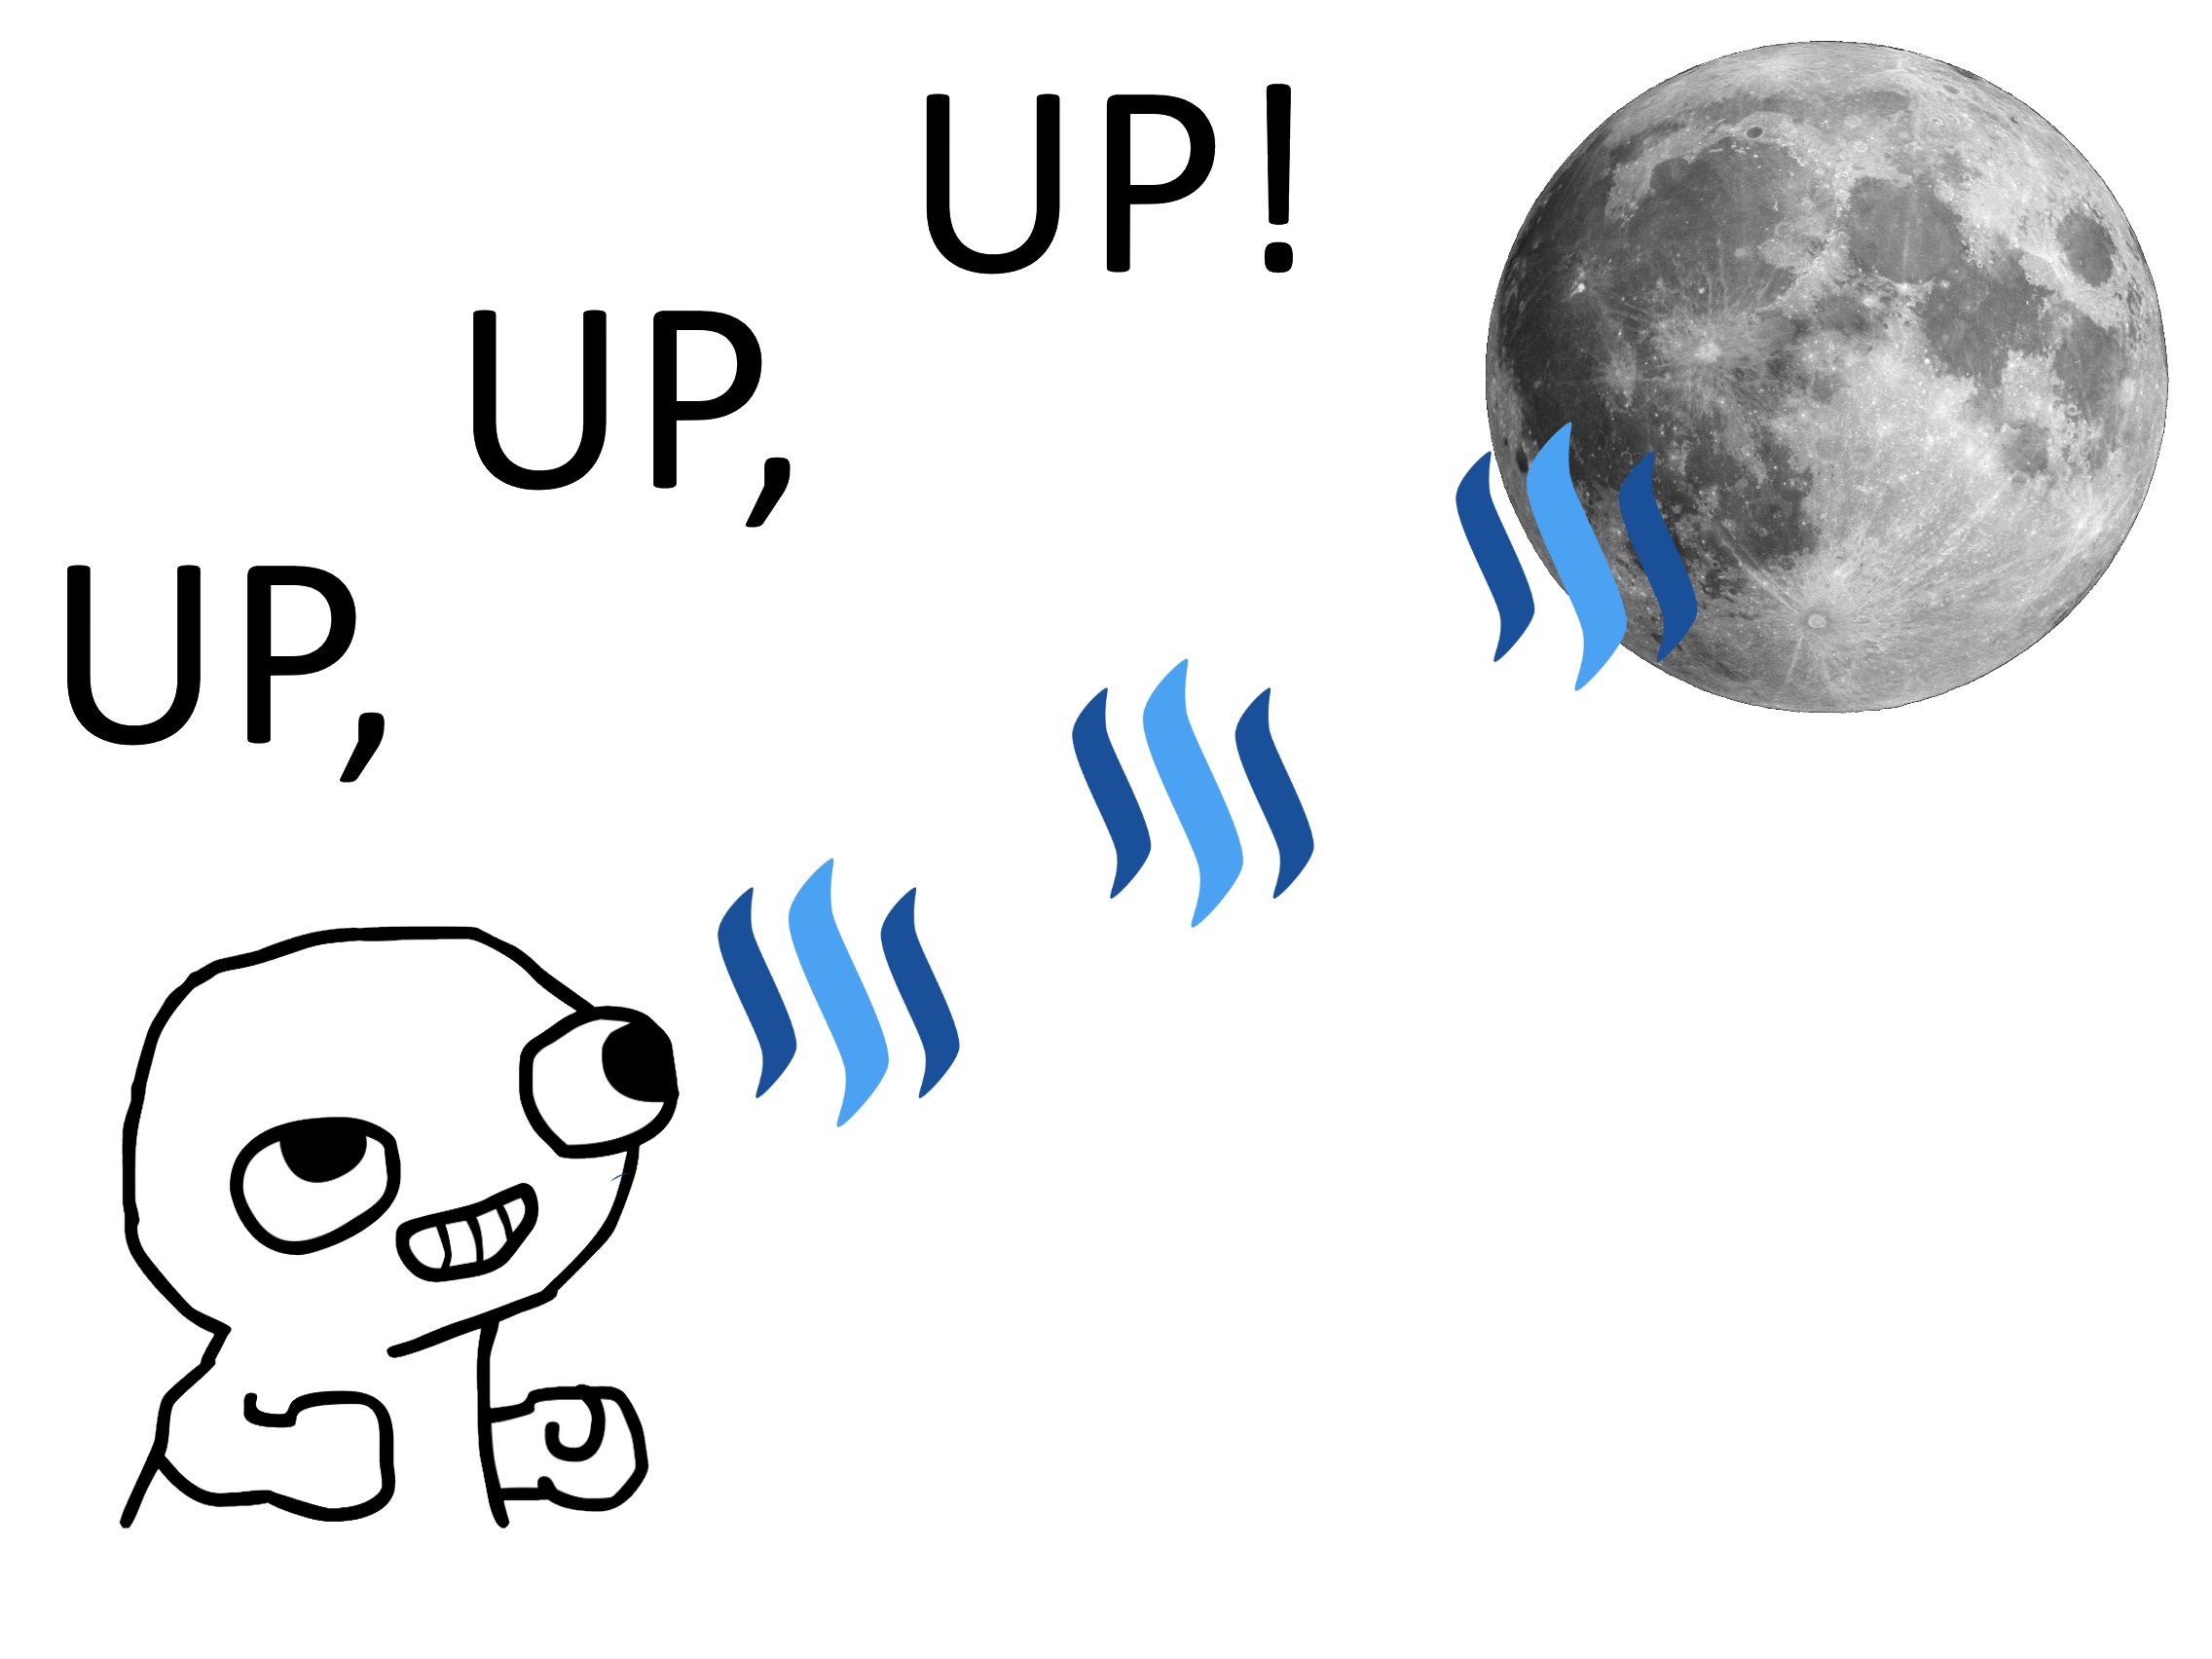 Aim for the moon!